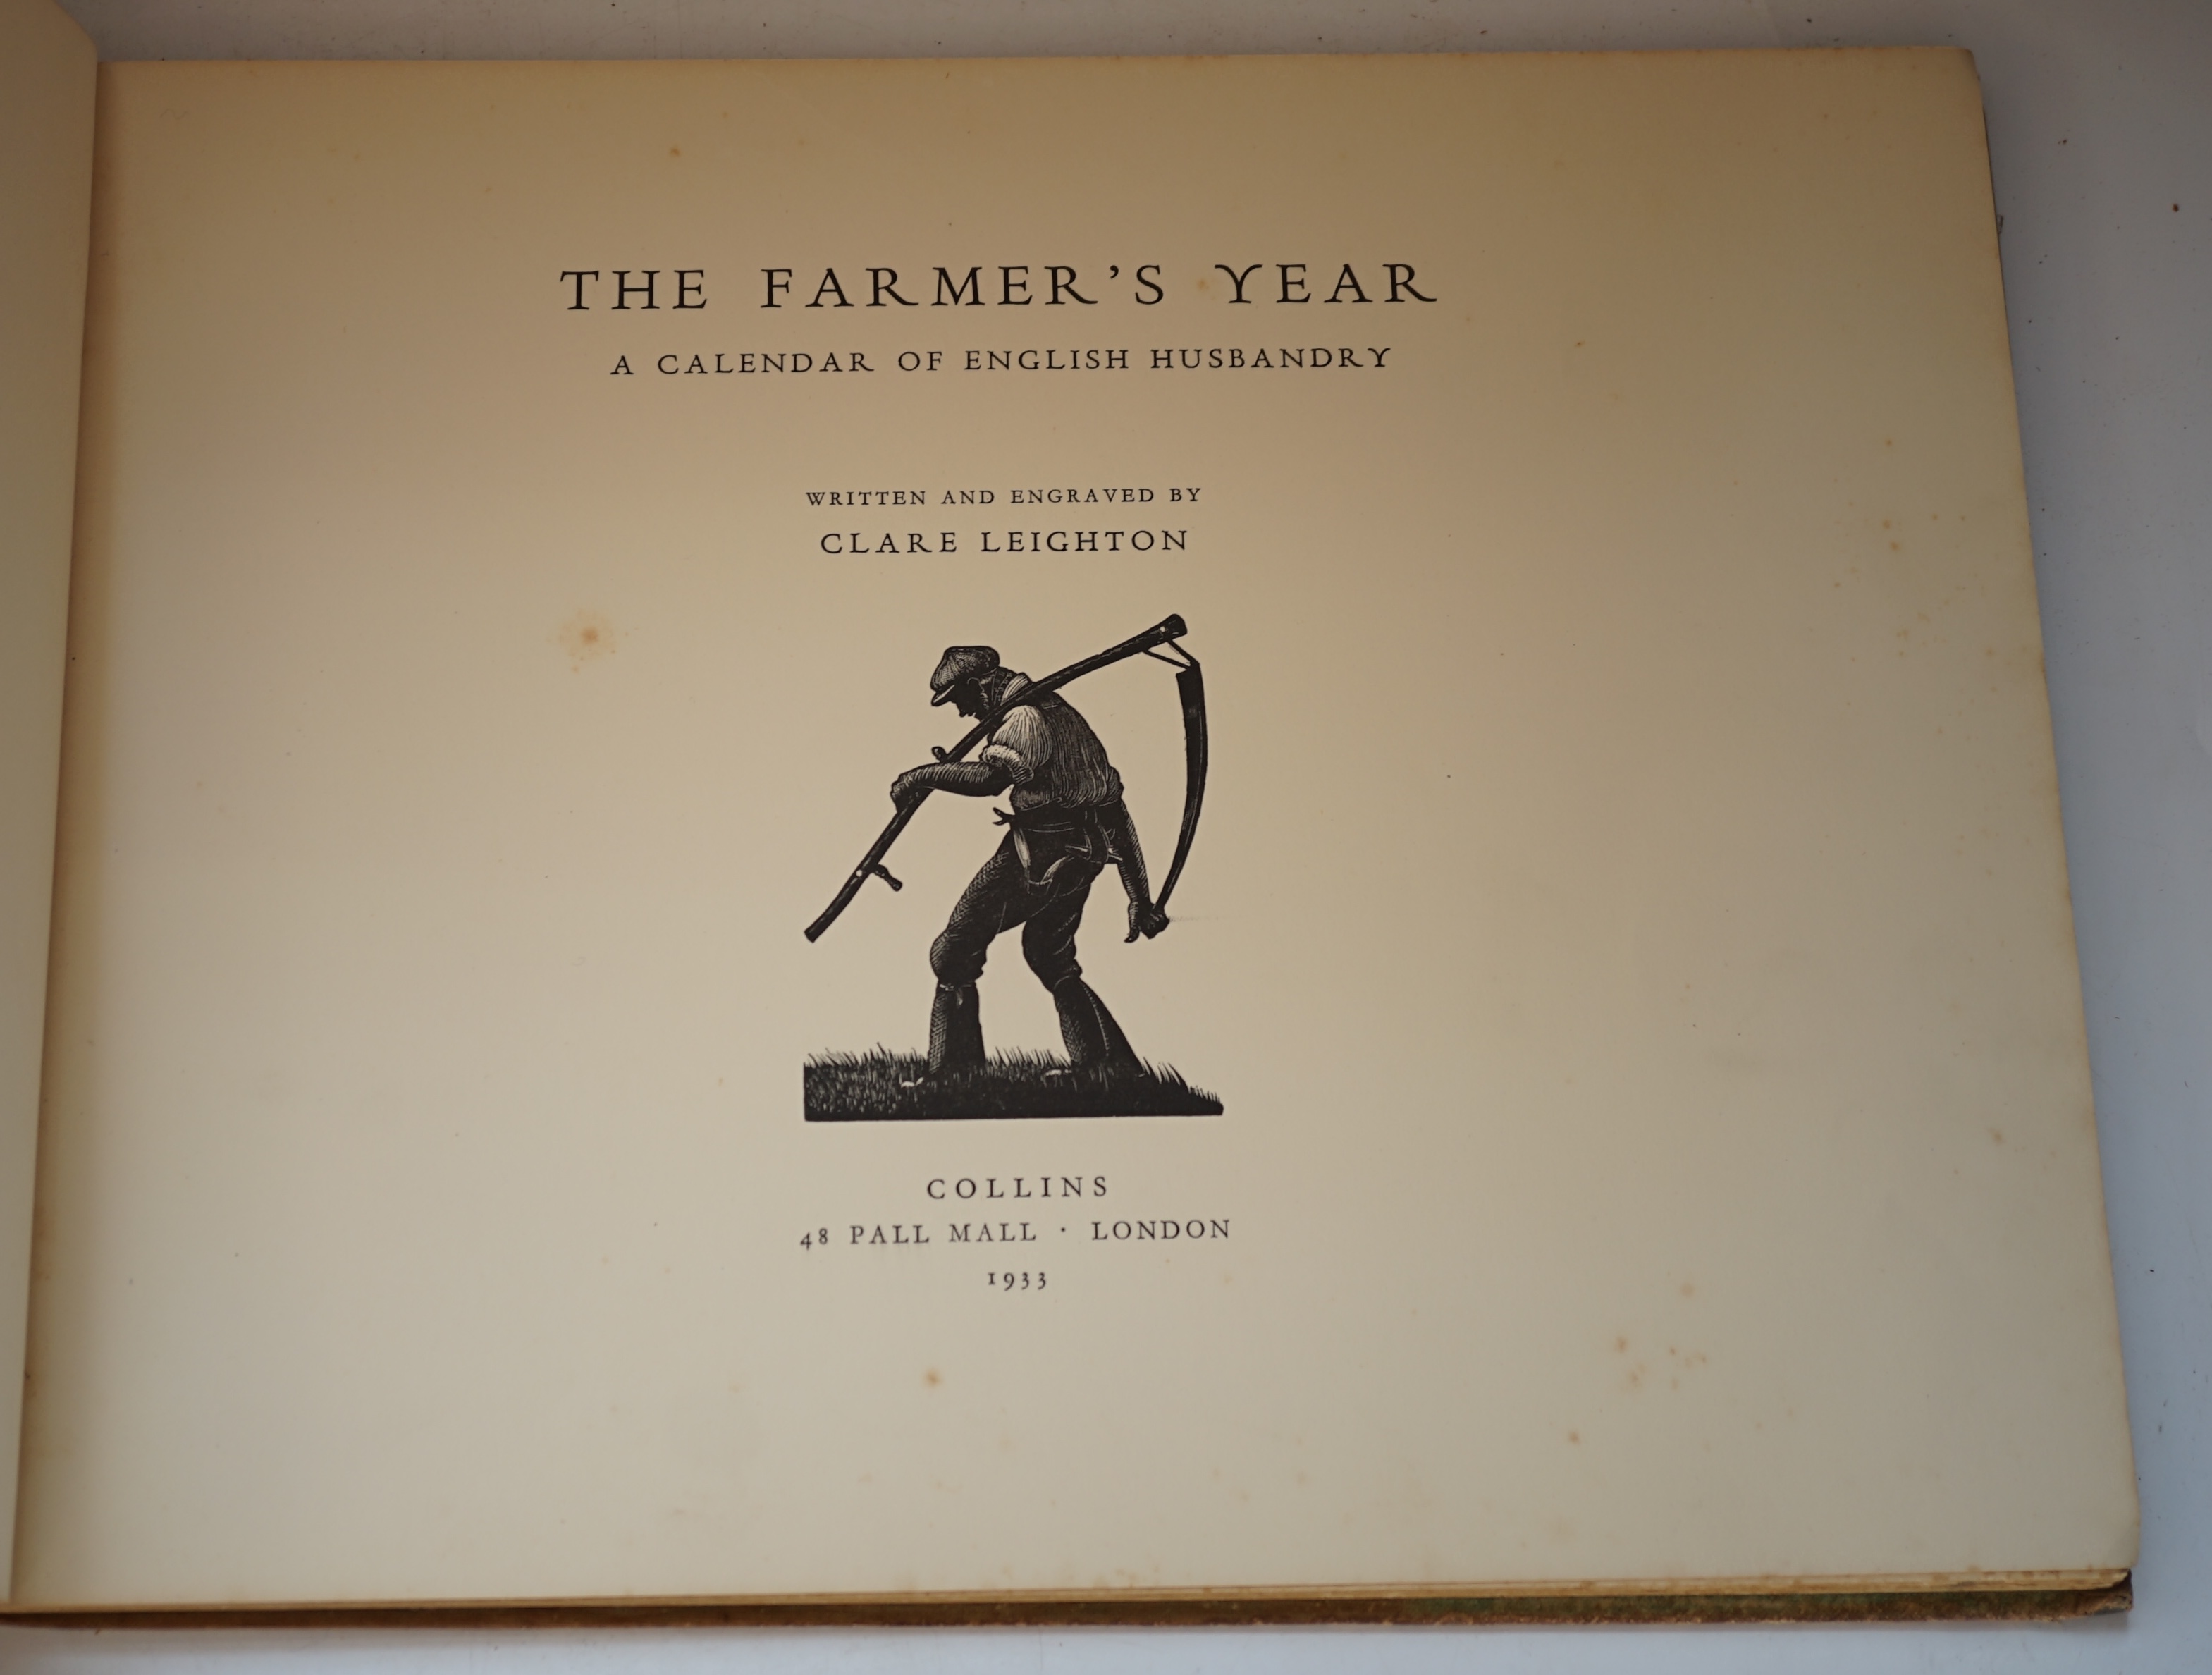 Leighton, Clare - The Farmer's Year, A Calendar of English Husbandry, written and engraved by Clare Leighton, 1st edition, titled with wood-engraved vignette, and 12 full-page wood-engravings, each with printed title to